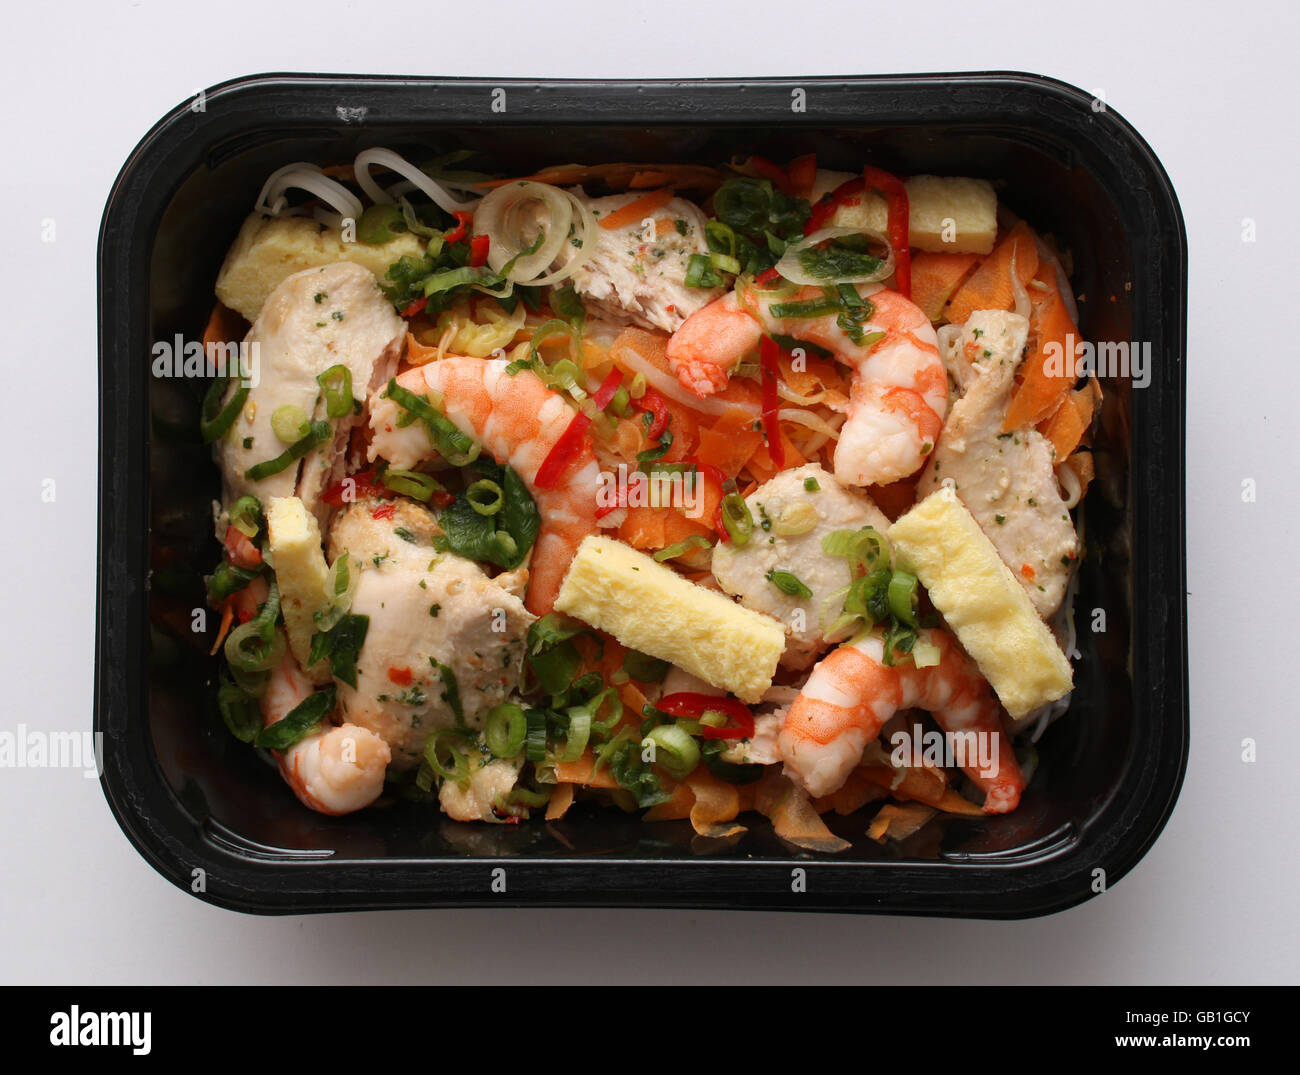 https://c8.alamy.com/comp/GB1GCY/ready-meals-singapore-noodles-a-marks-and-spencer-ready-meal-GB1GCY.jpg